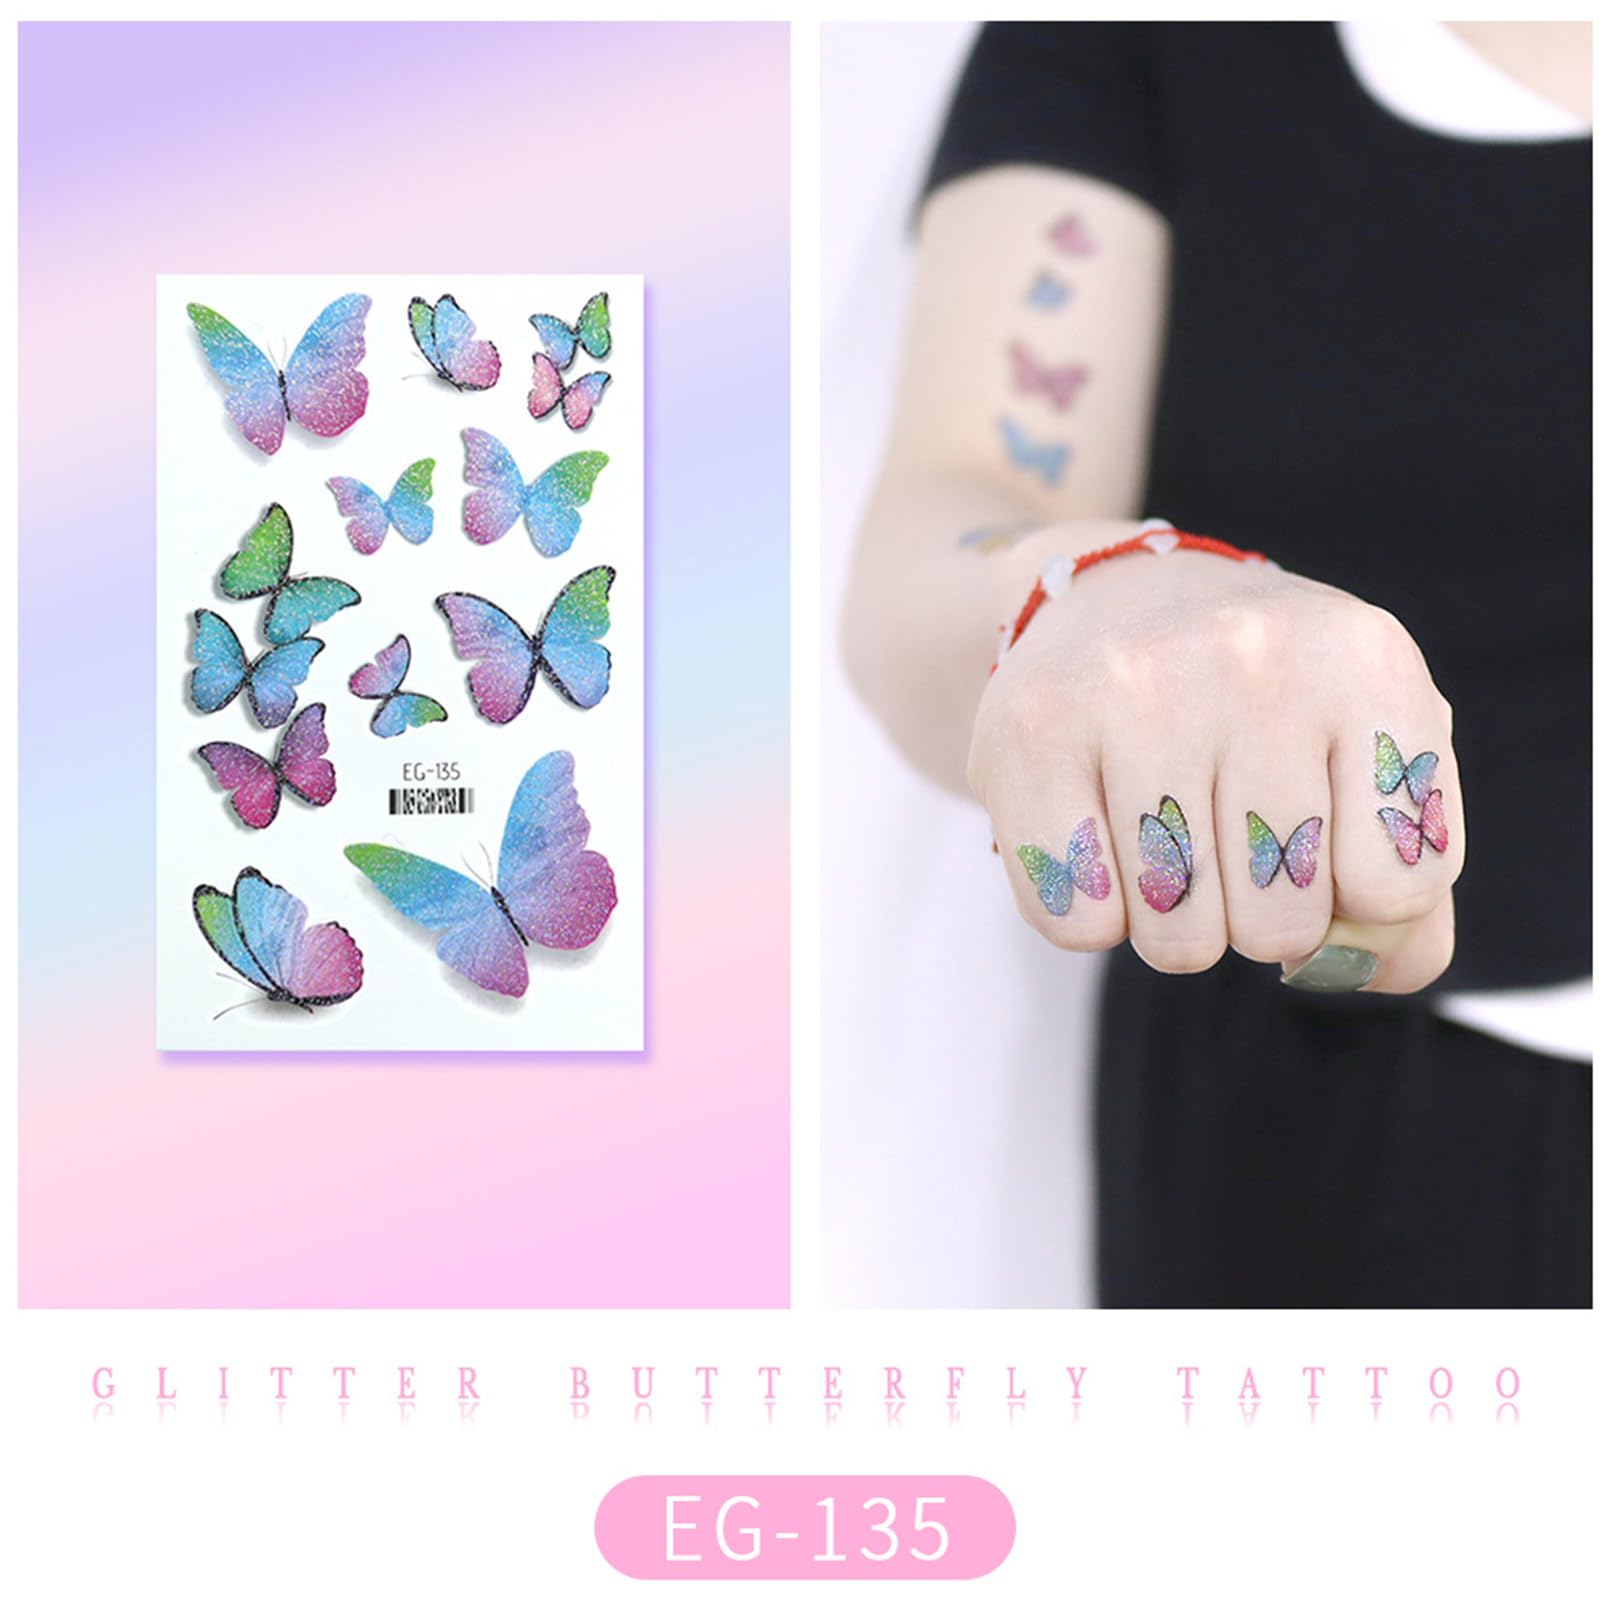 Onogola Glitter Butterfly Makeup Temporary Tattoos for Women Girls, 10Sheets Colorful Butterflies Wings Fake Tattoo Stickers Waterproof for Face Eye Makeup Birthday Party Favors Gifts